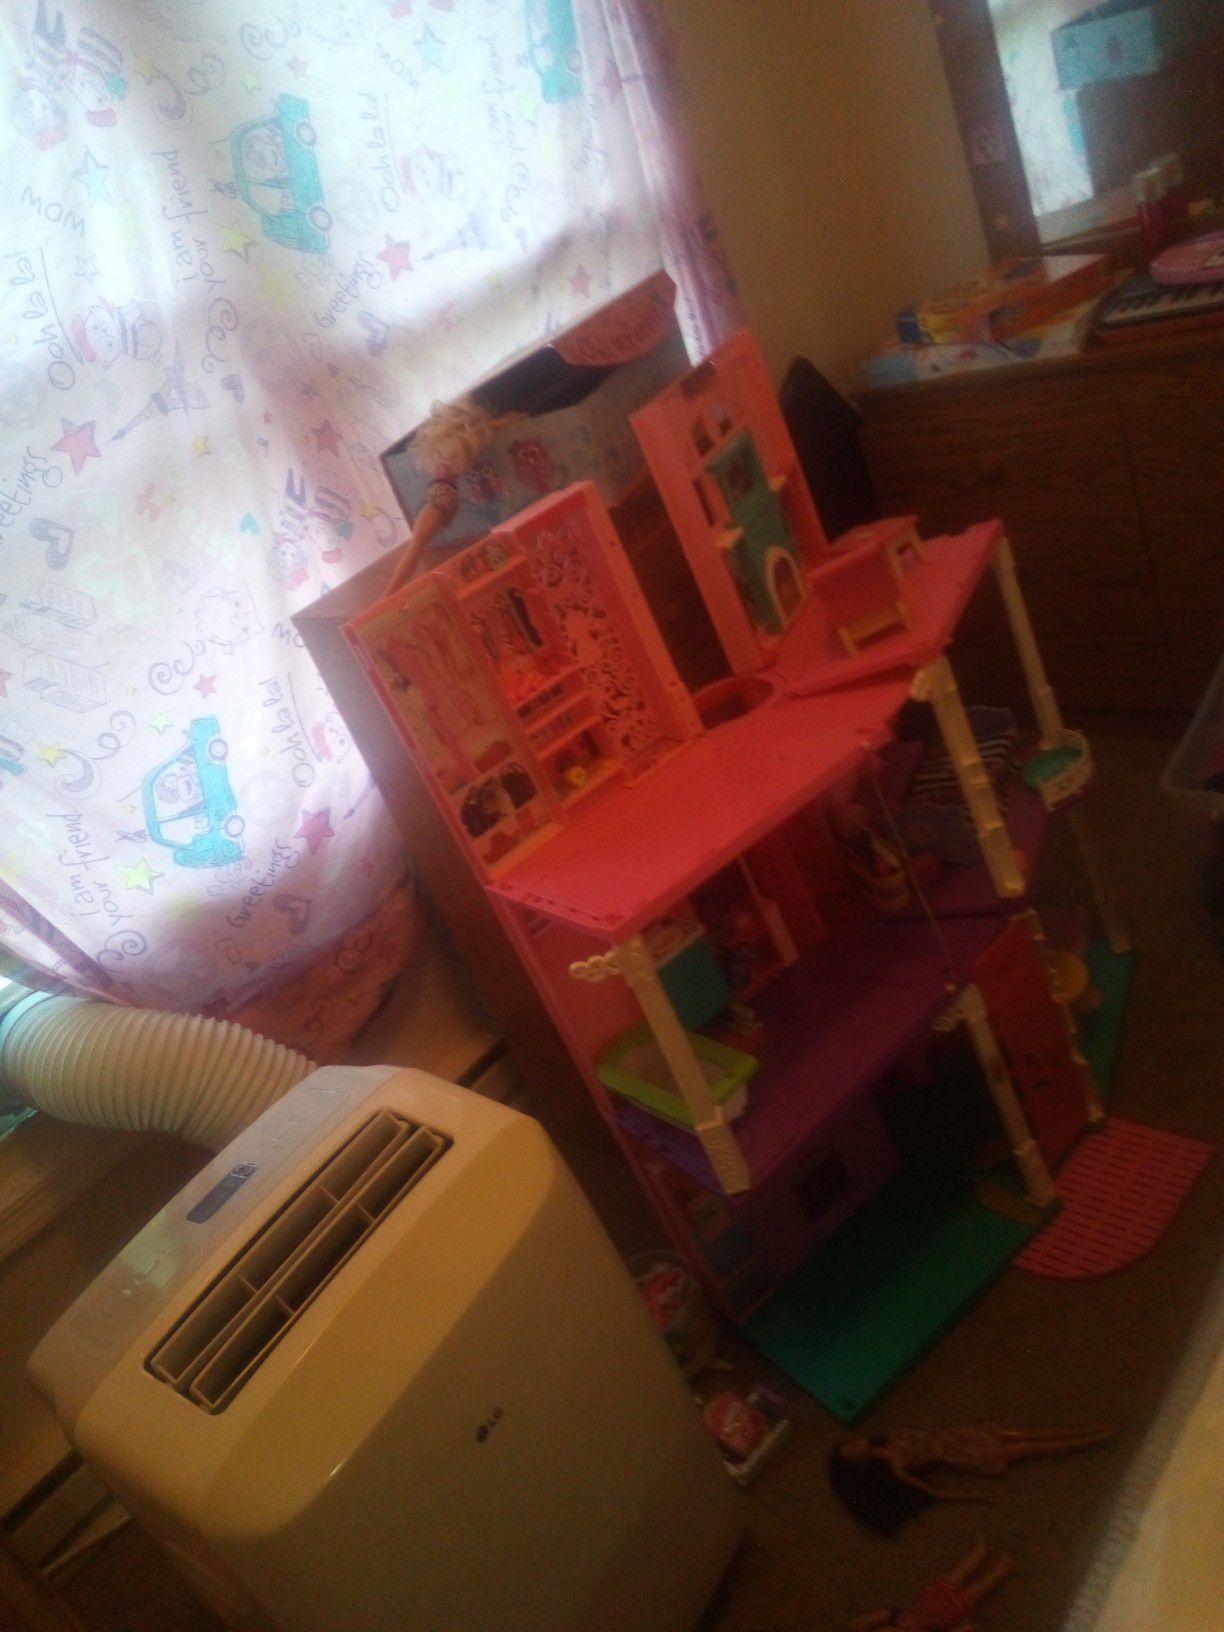 Barbie dream house, wooden doll house and sun glasses